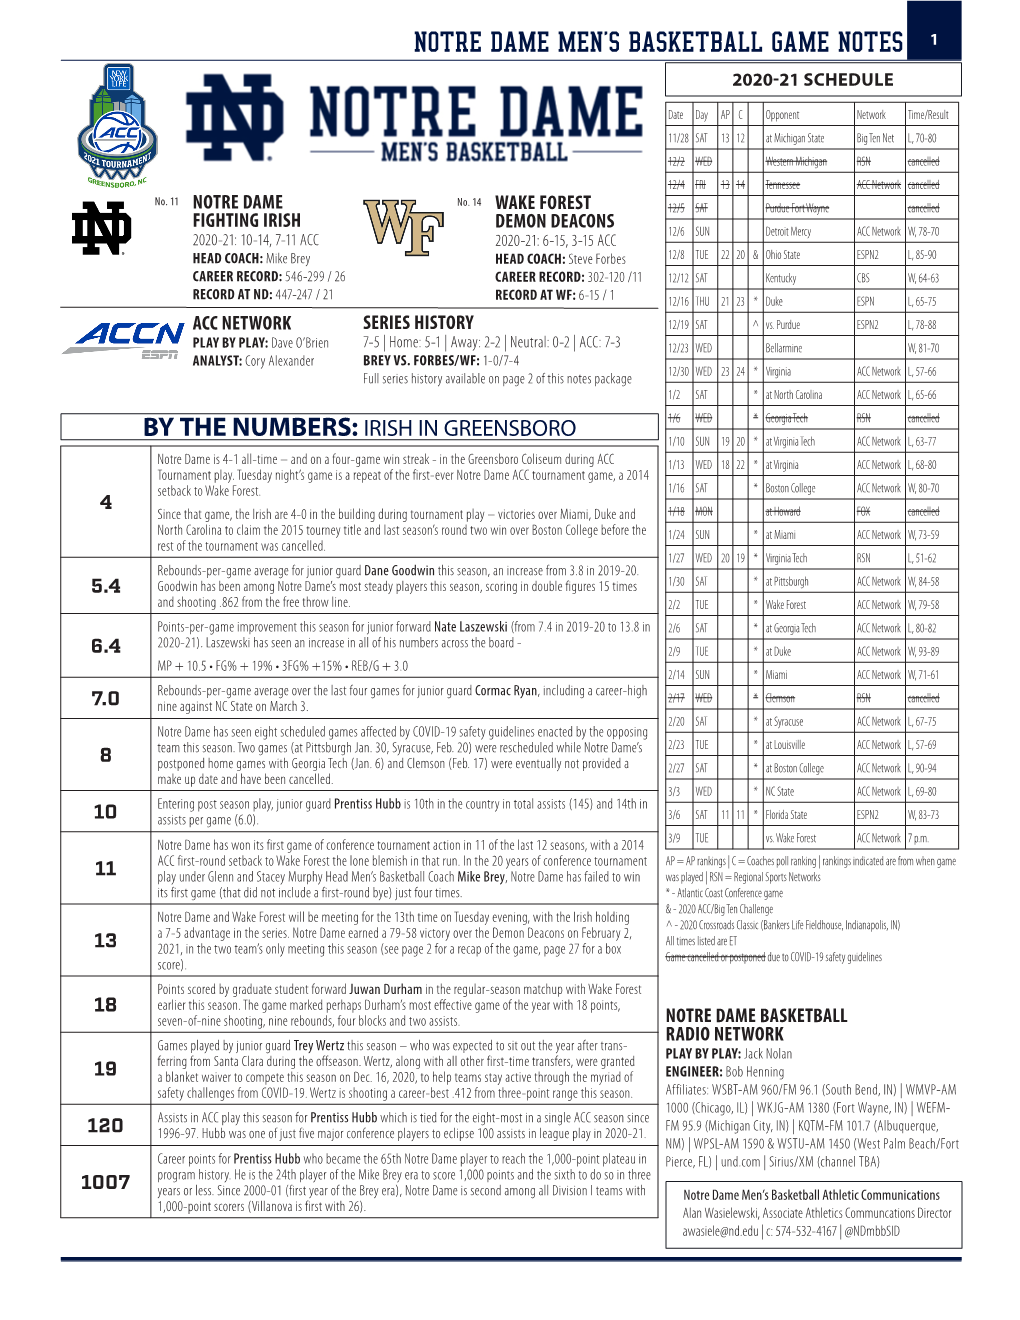 Notre Dame Game Notes Vs. Wake Forest (ACC First Round)